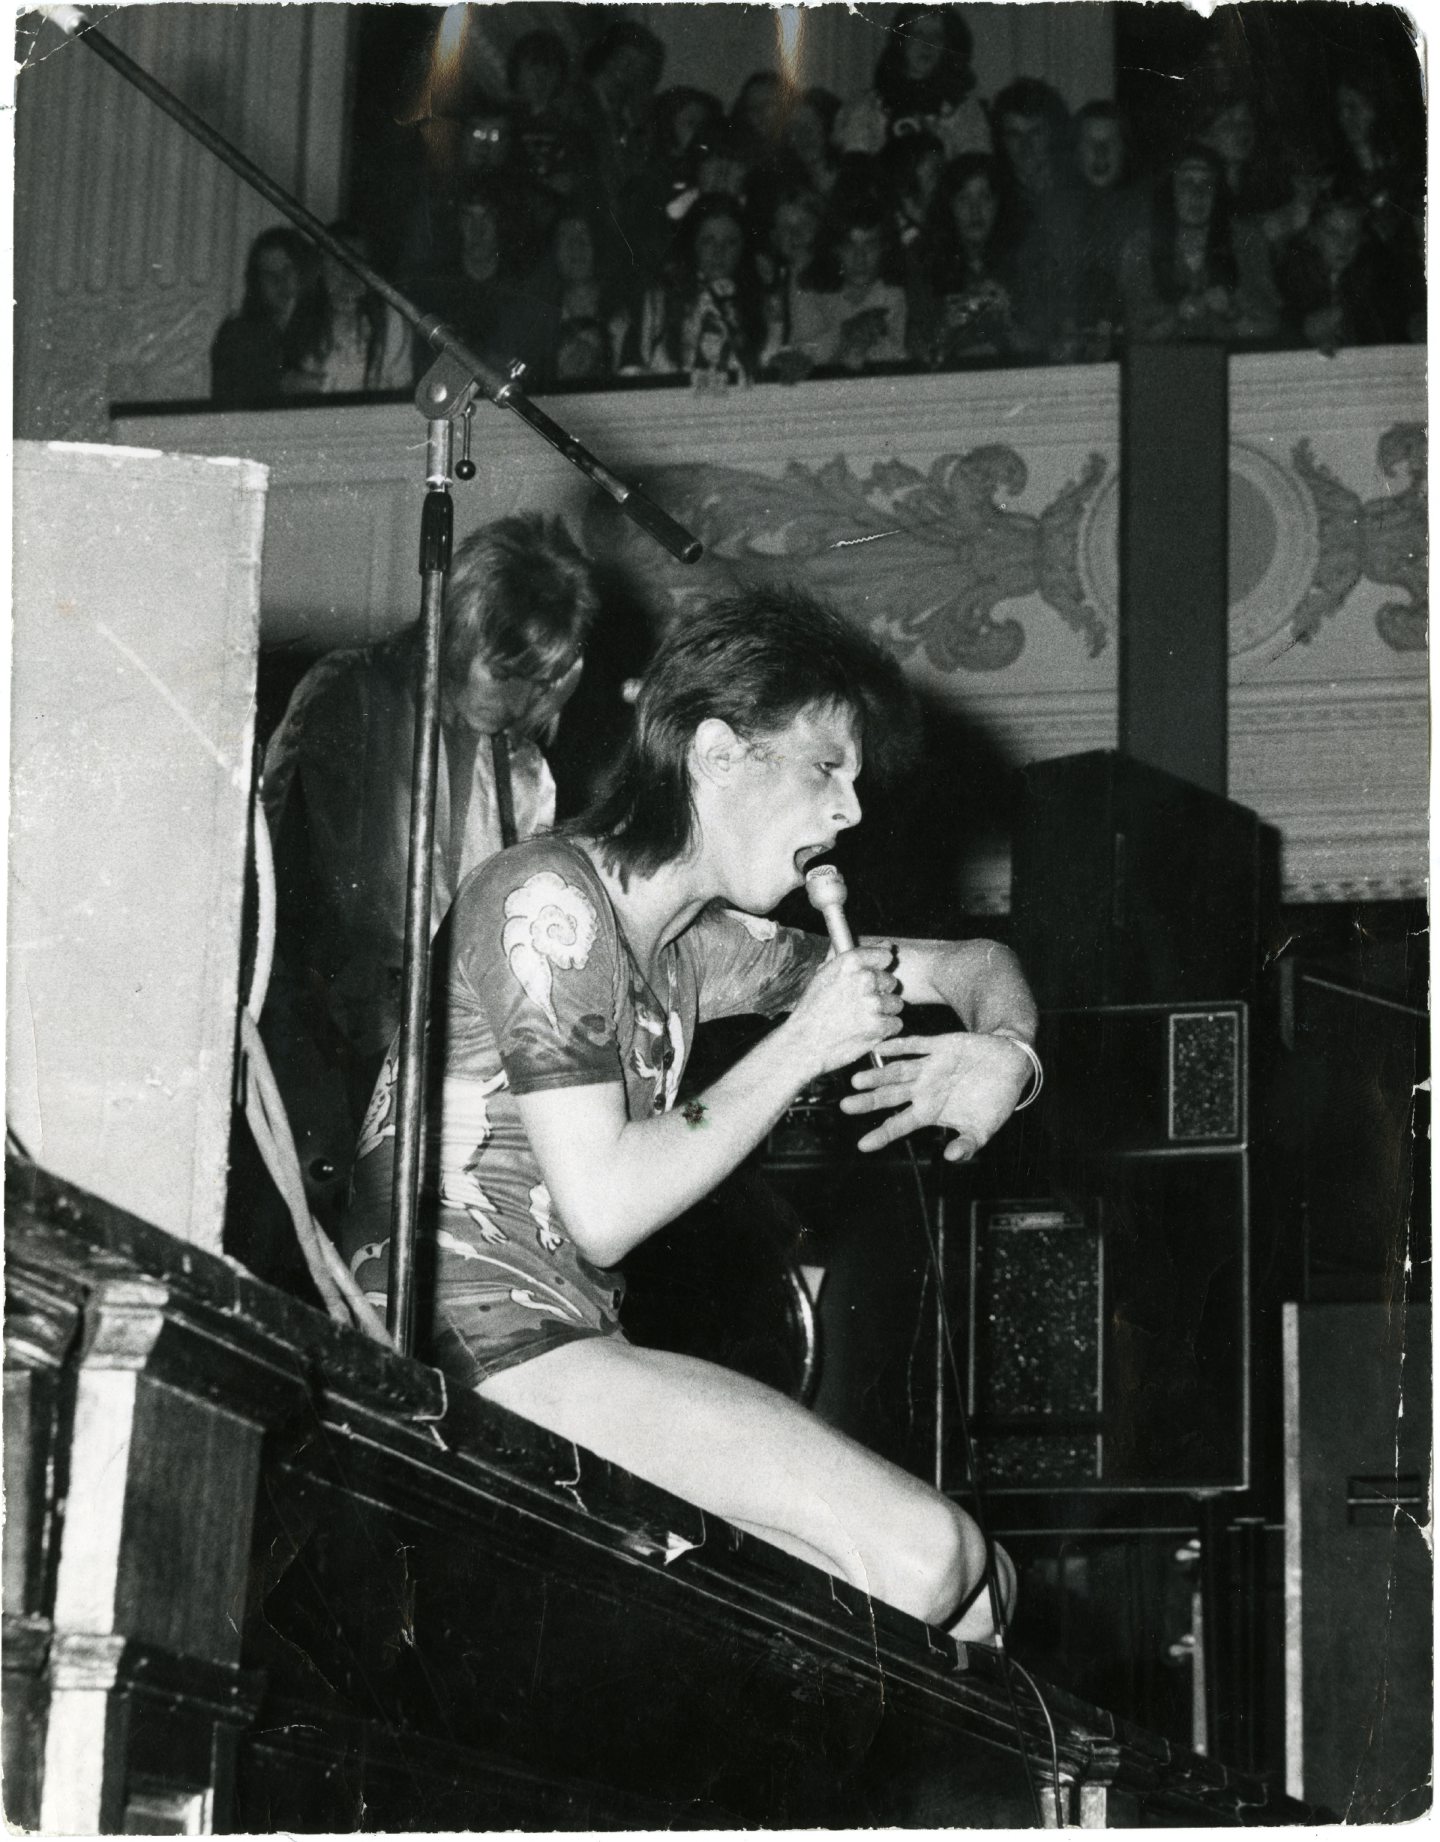 David Bowie onstage at the Caird Hall in May 1973. Image: DC Thomson.